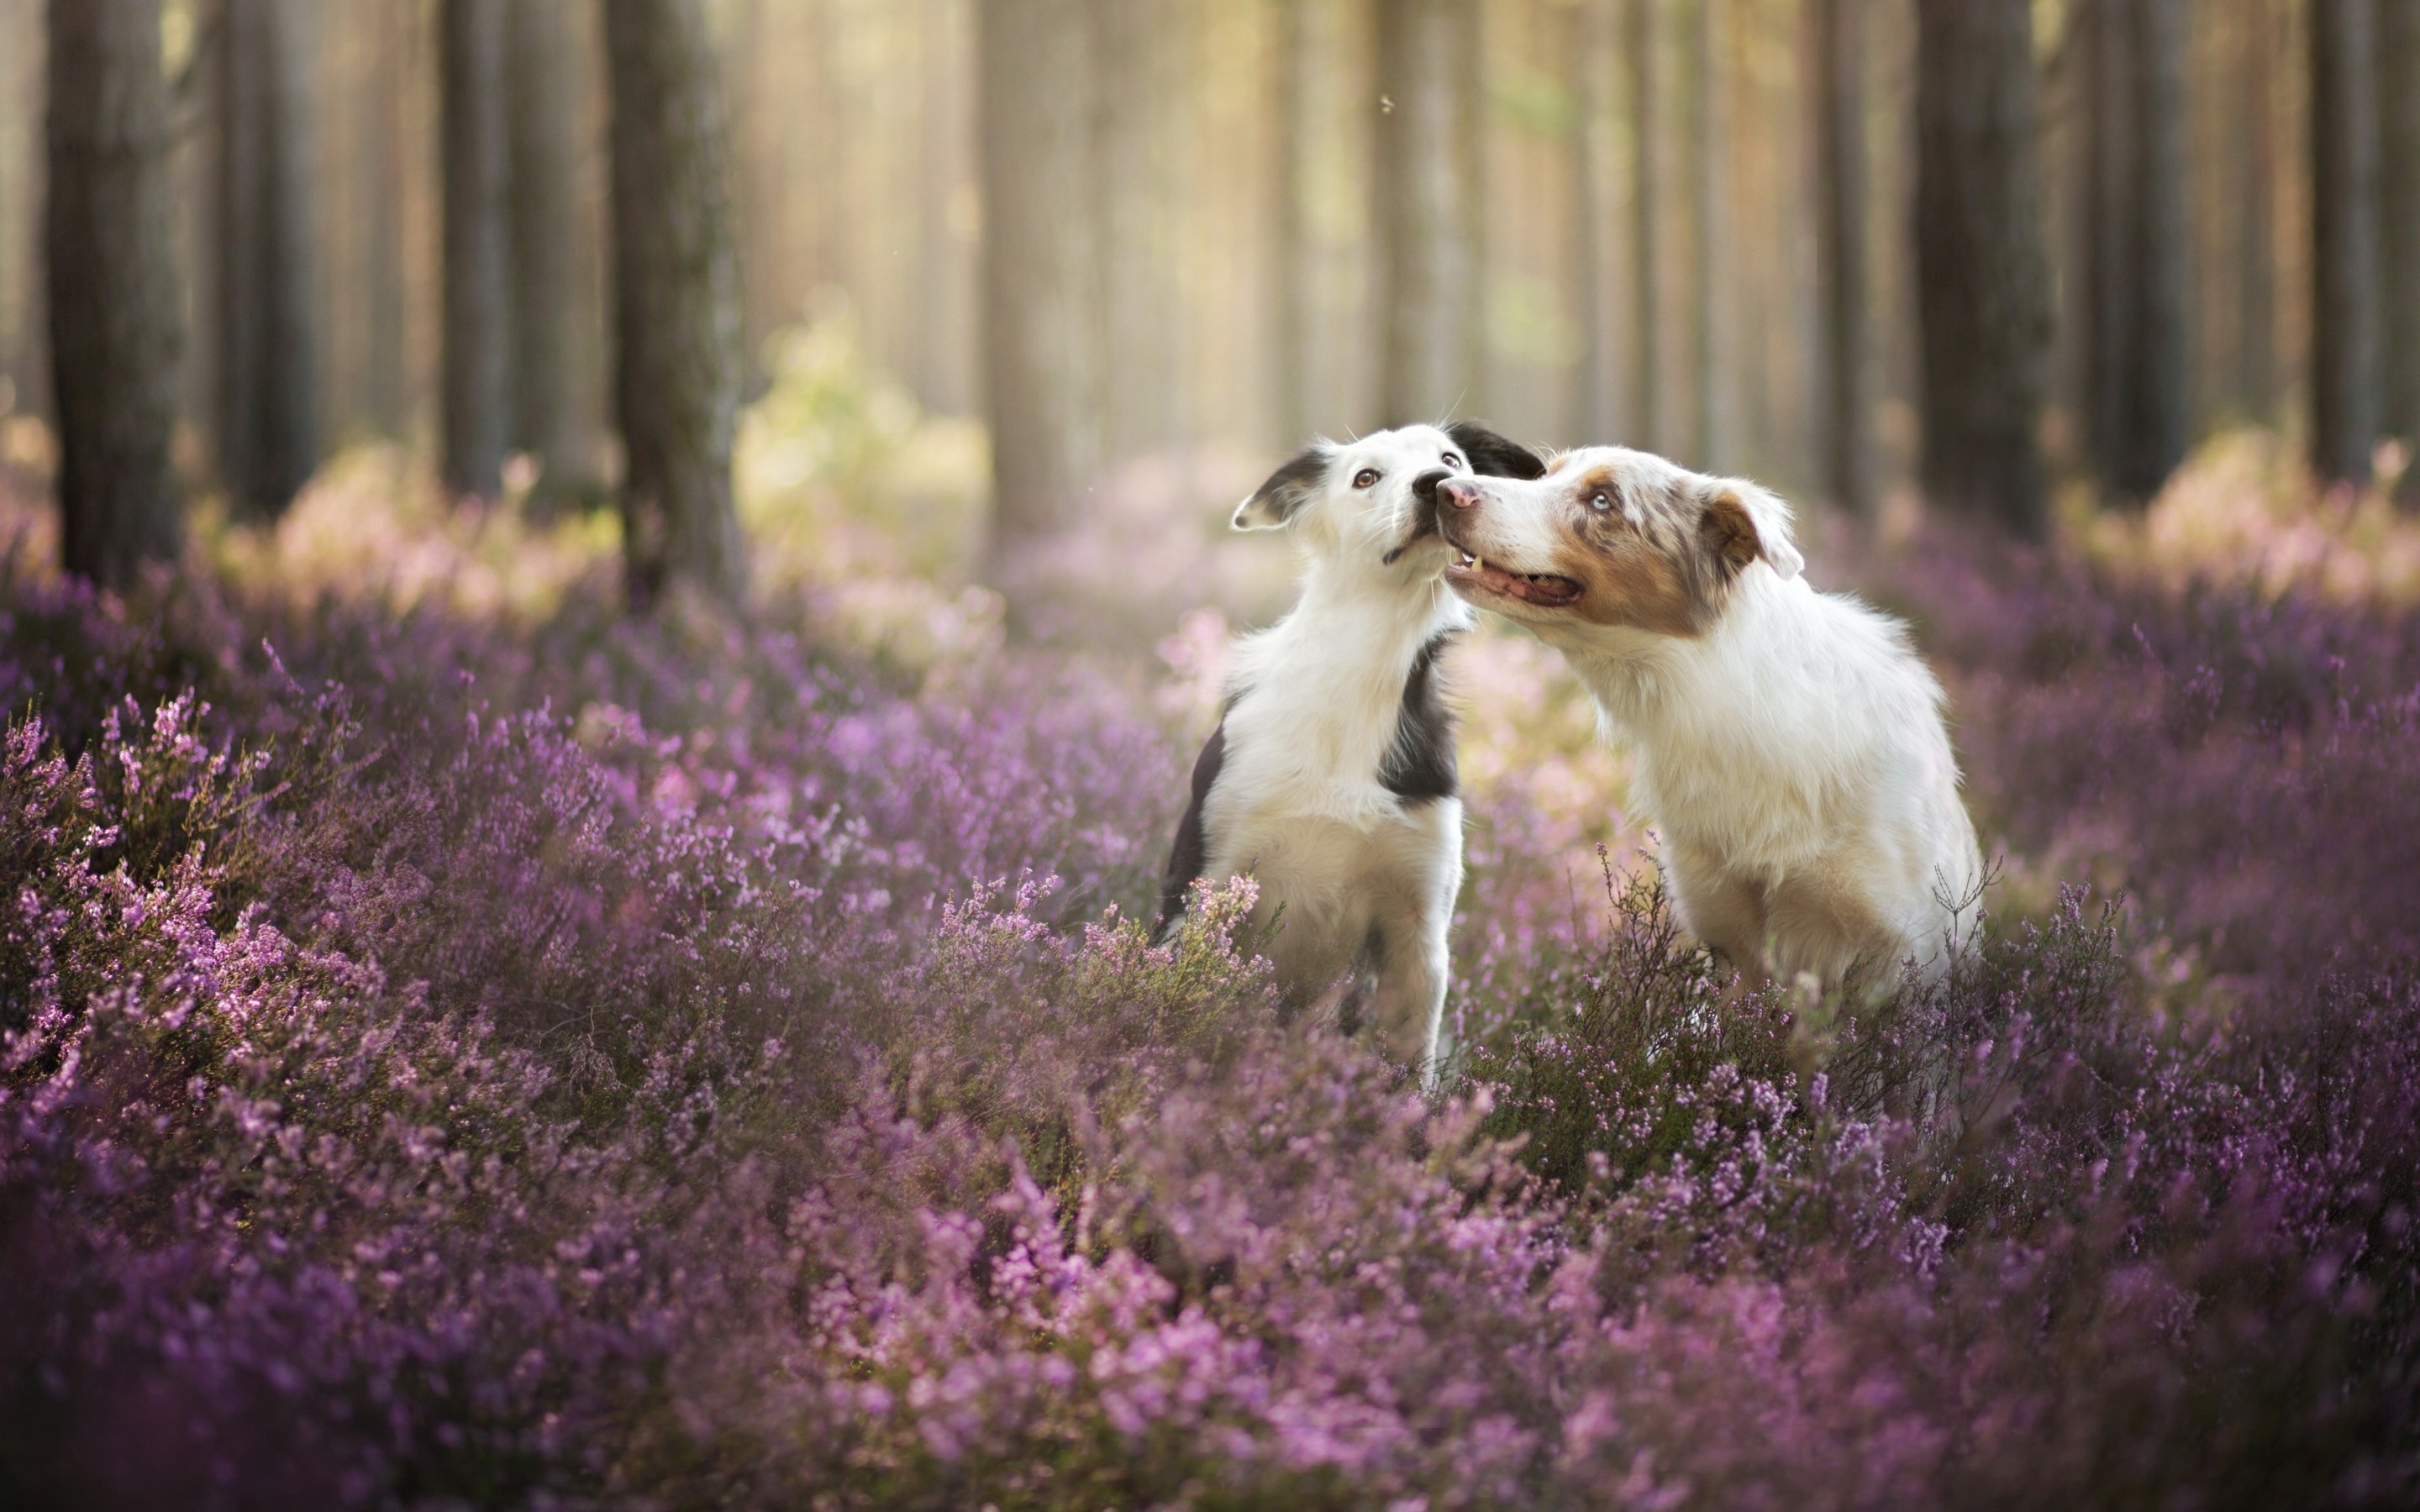 Cute Dogs Playing for 2880 x 1800 Retina Display resolution